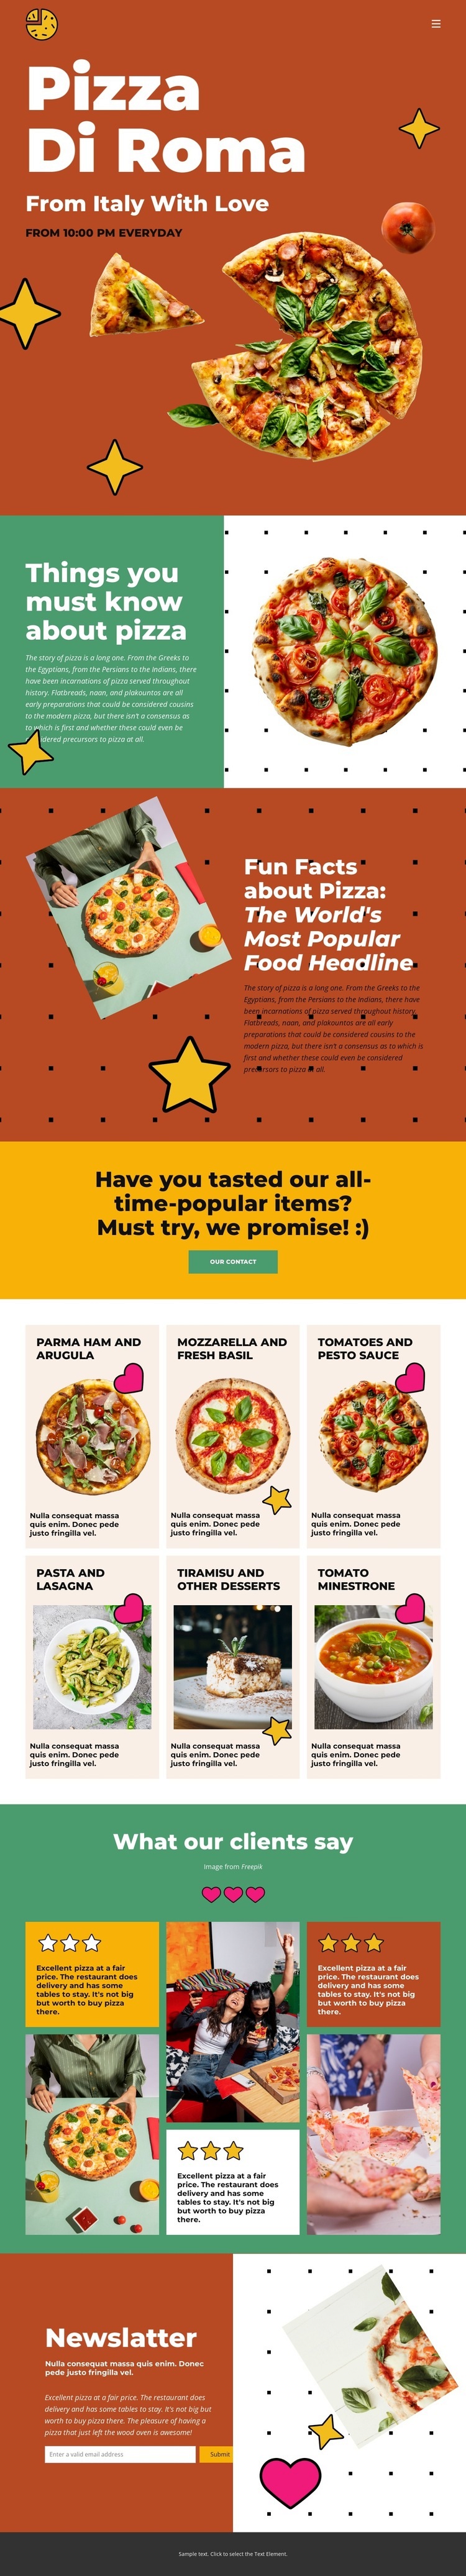 Things you must know about pizza Web Page Design